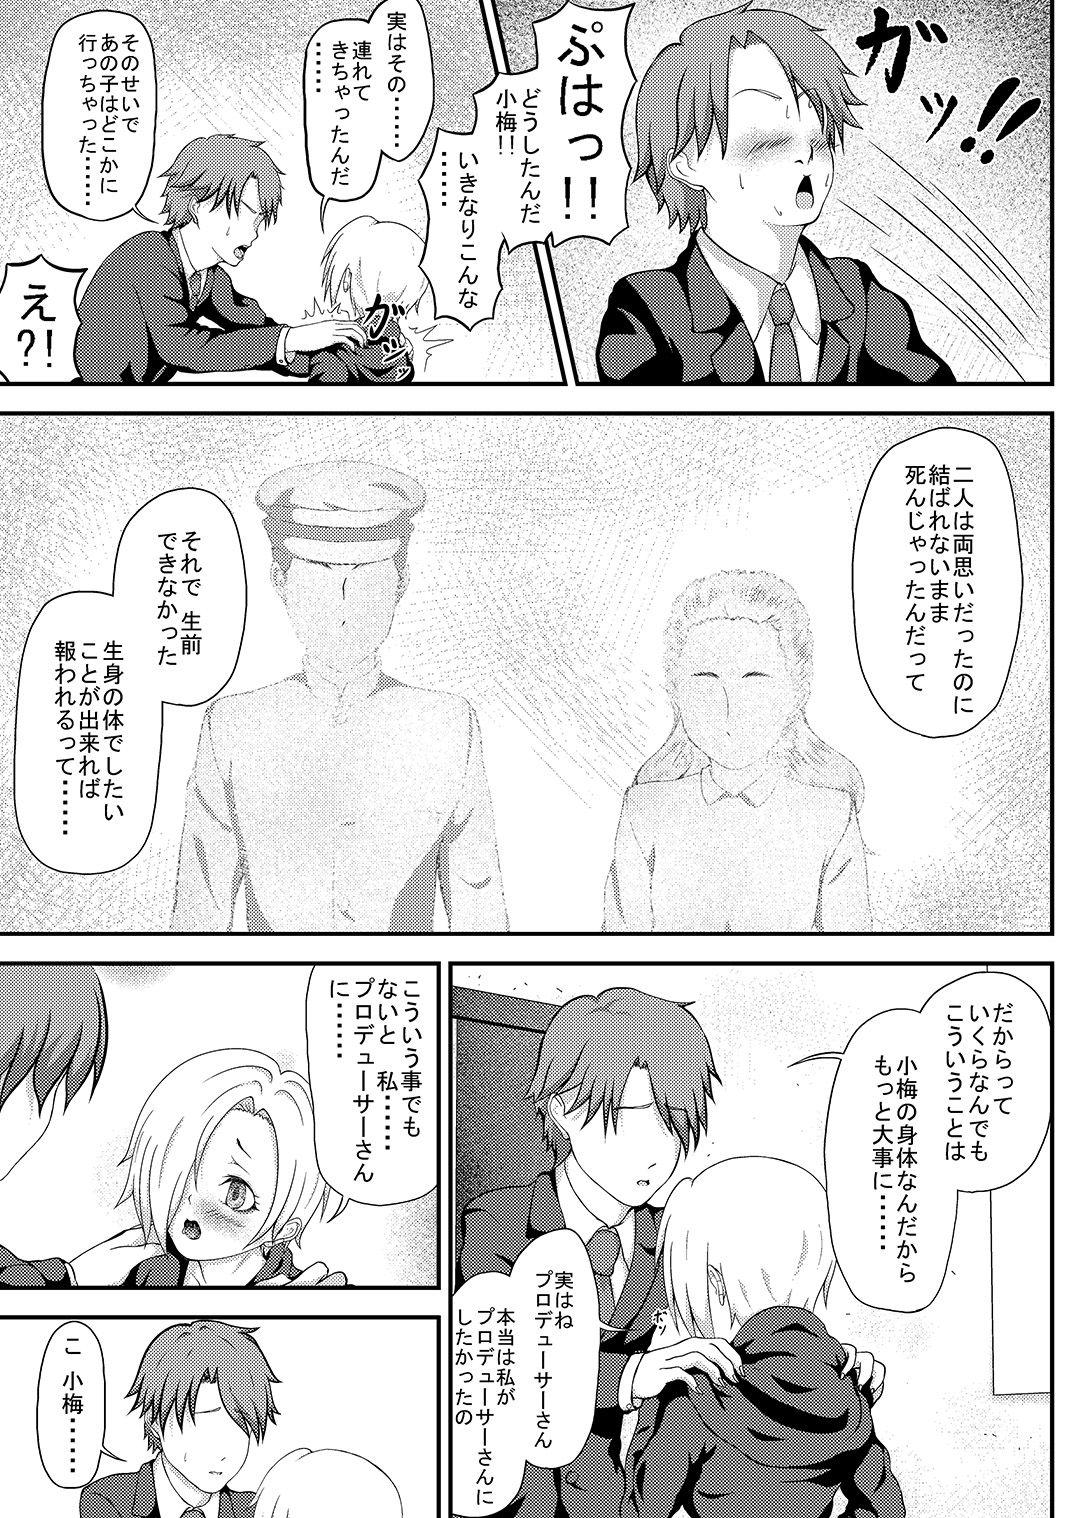 Webcam The H-aunting of Koume-chan - The idolmaster Punished - Page 5